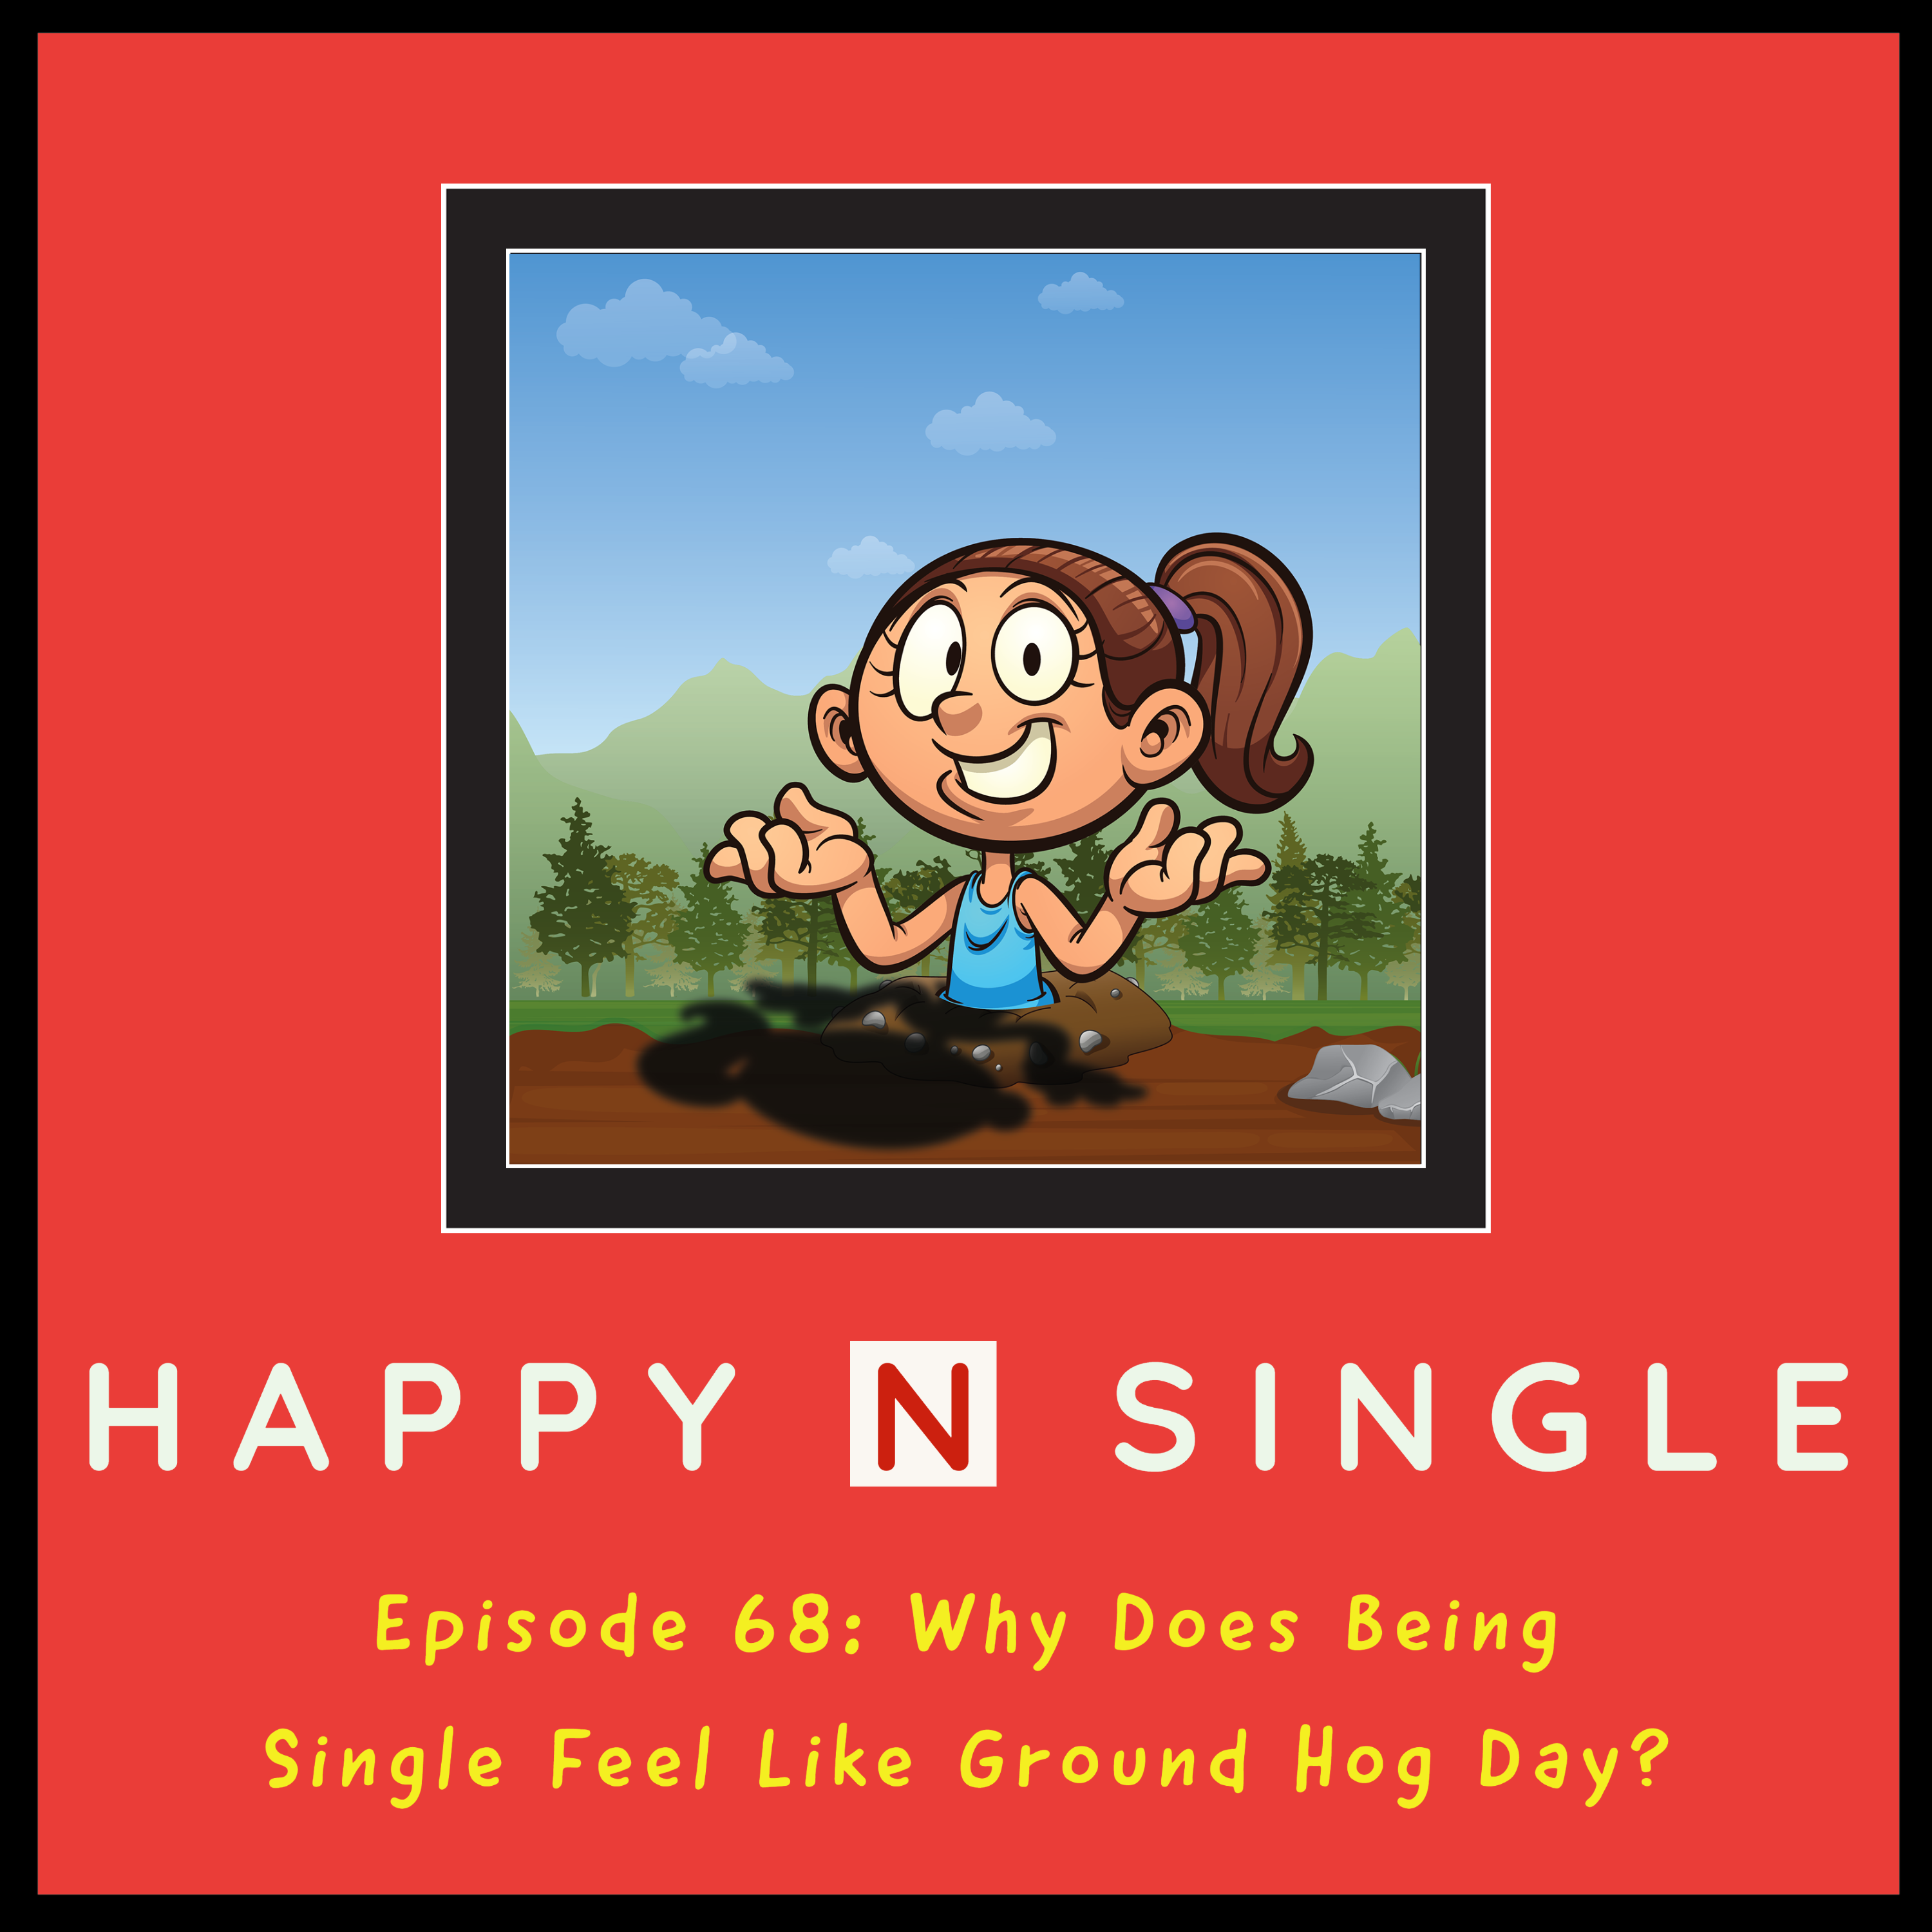 Why Does Being Single Feel Like Ground Hog Day?